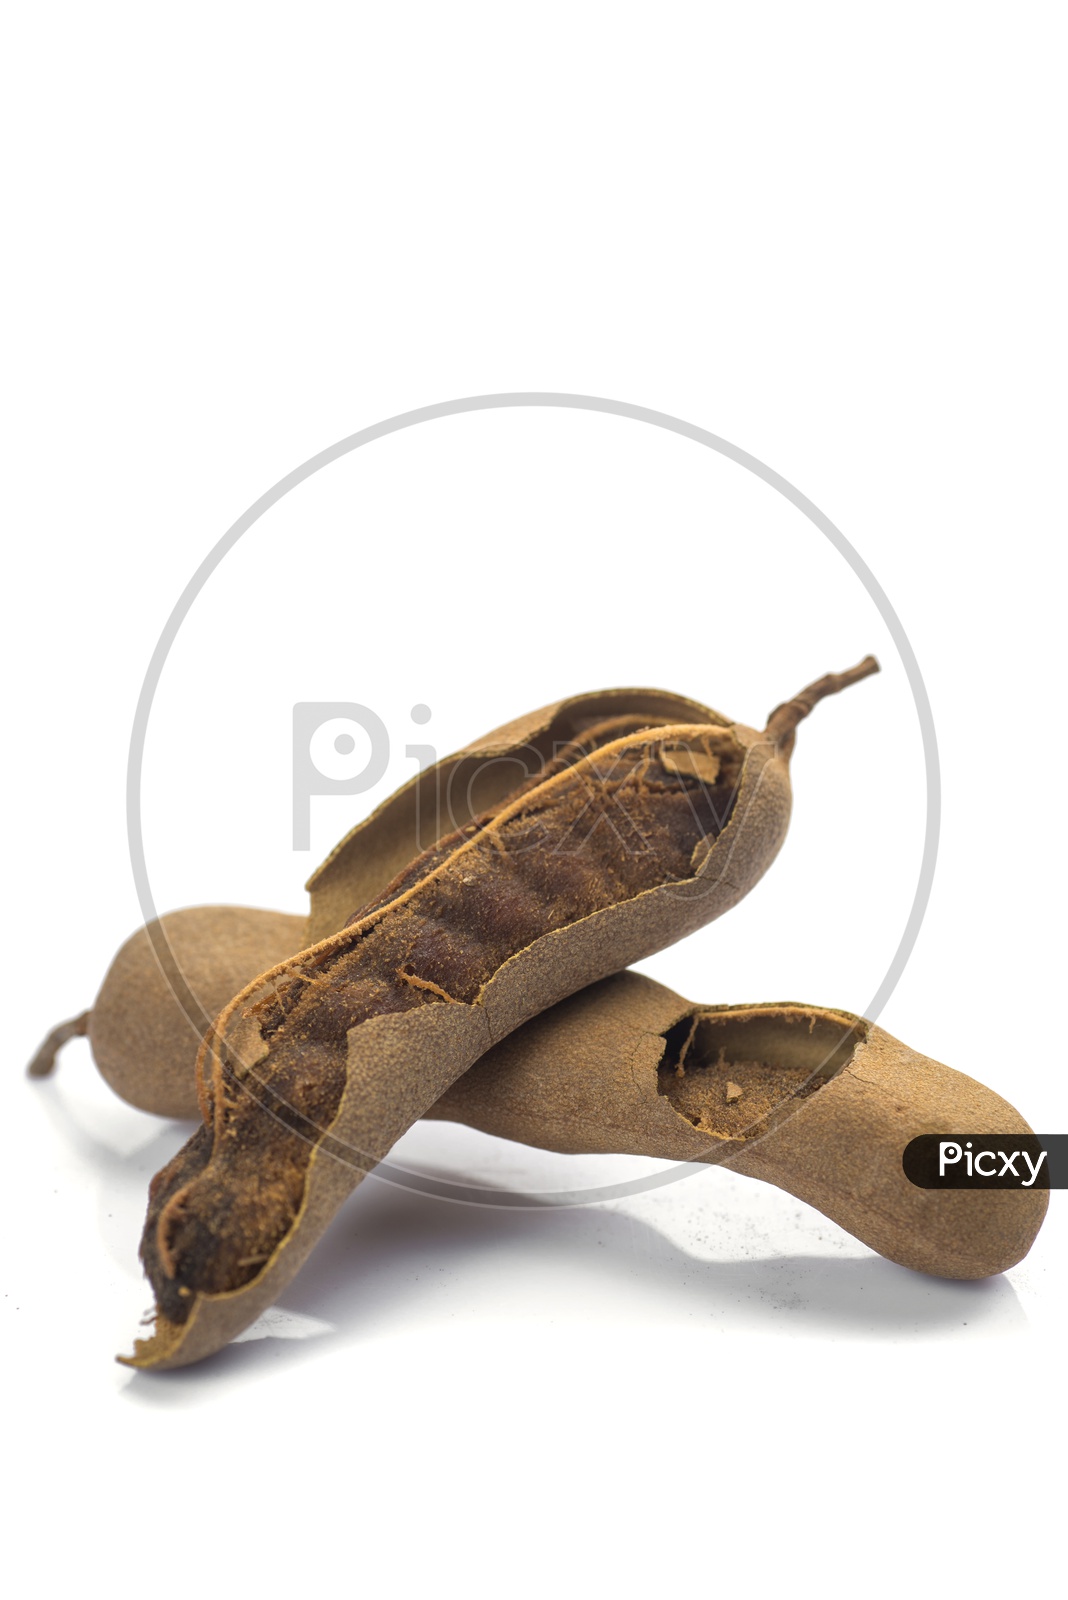 Ripen Tamarind On an isolated White Background